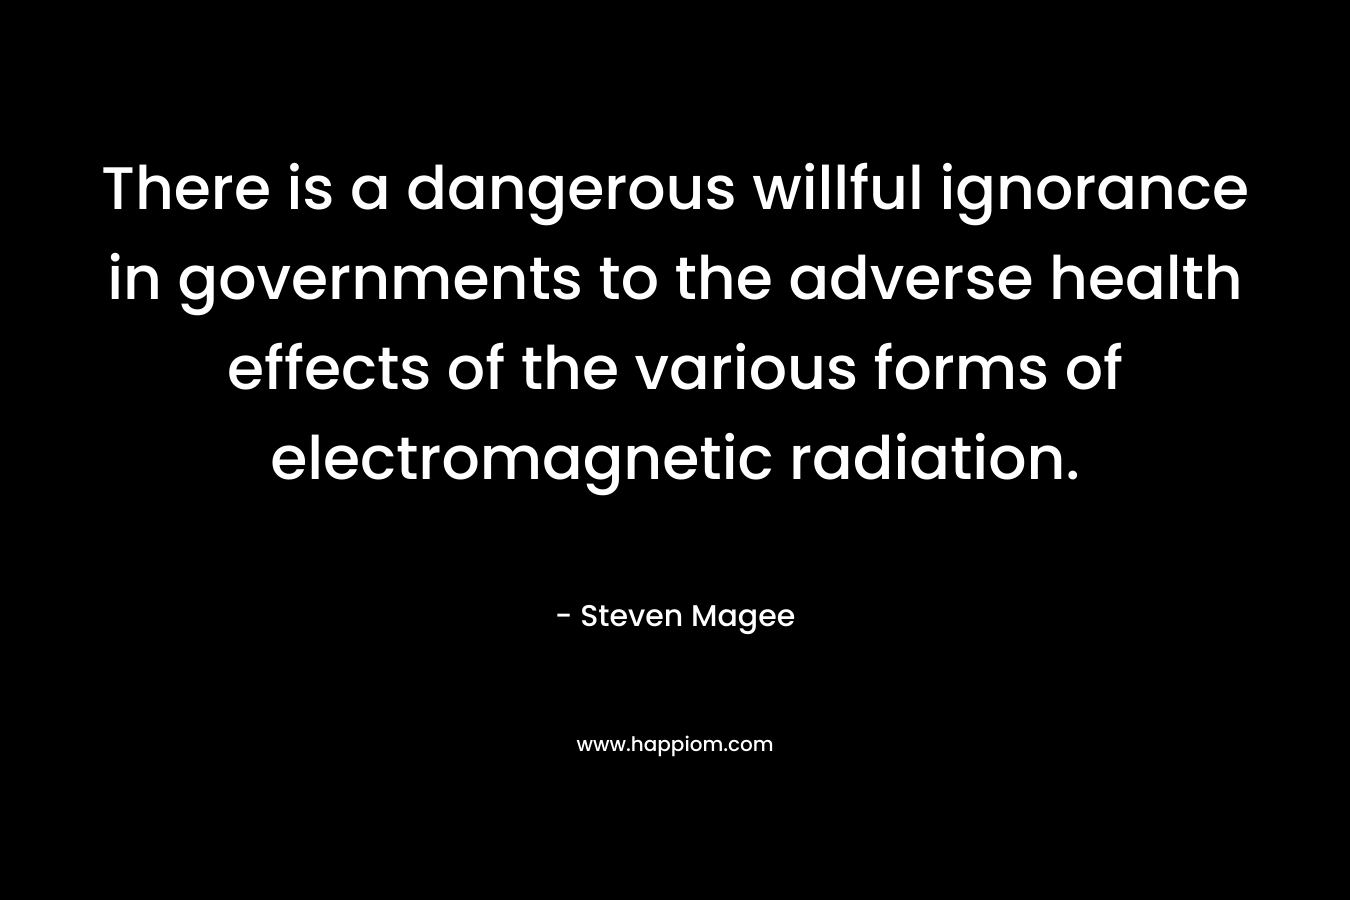 There is a dangerous willful ignorance in governments to the adverse health effects of the various forms of electromagnetic radiation. – Steven Magee